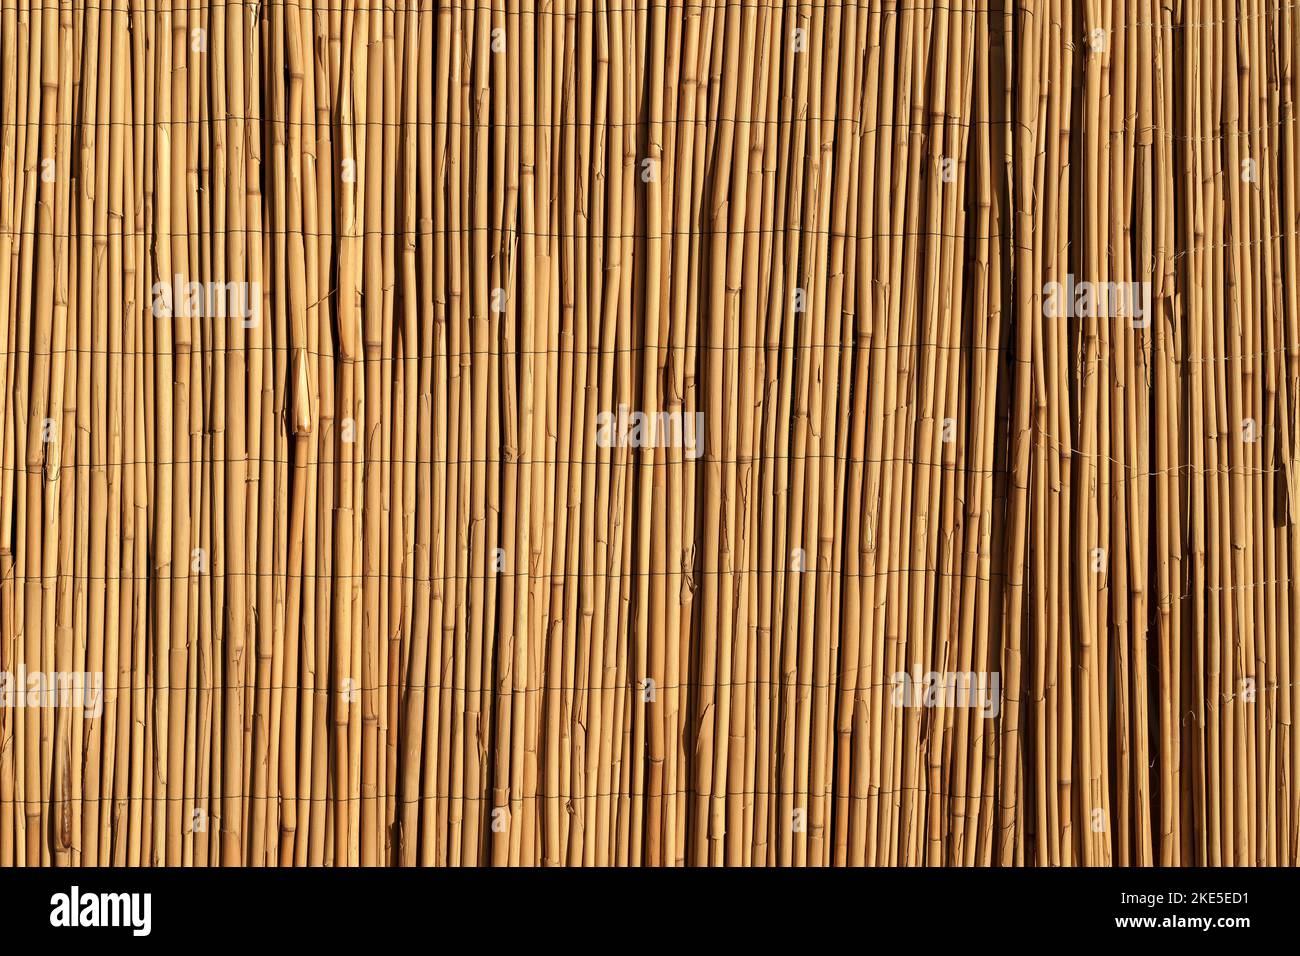 Bamboo background. Wooden texture bamboo plant on the decorative wall. High quality photo Stock Photo